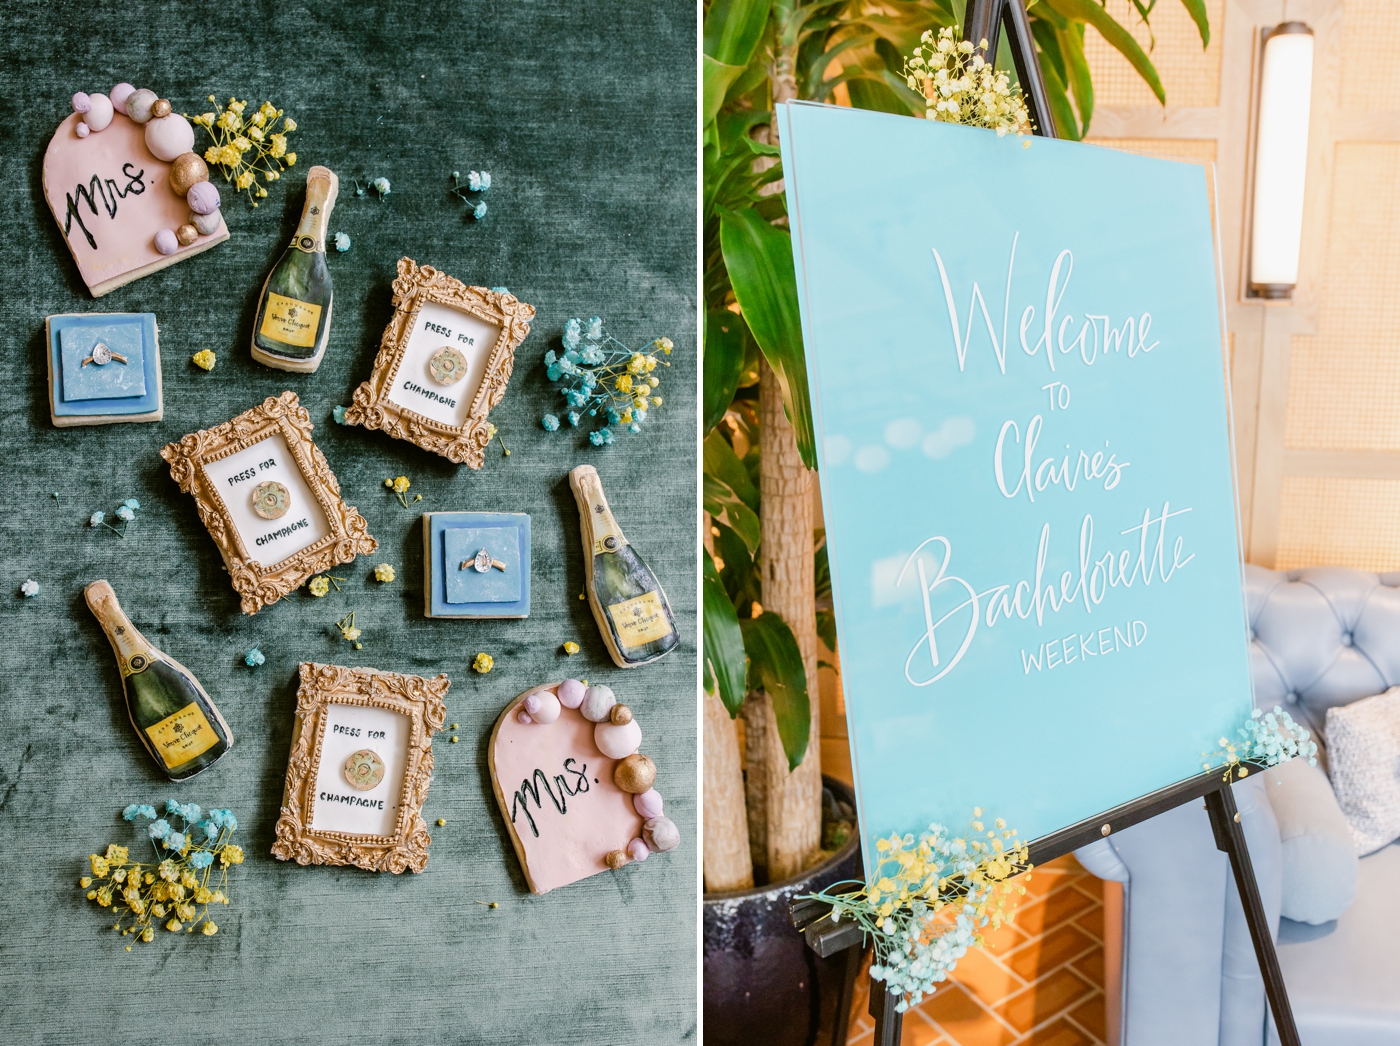 Why you should have a wedding weekend - Izzy + Co. 